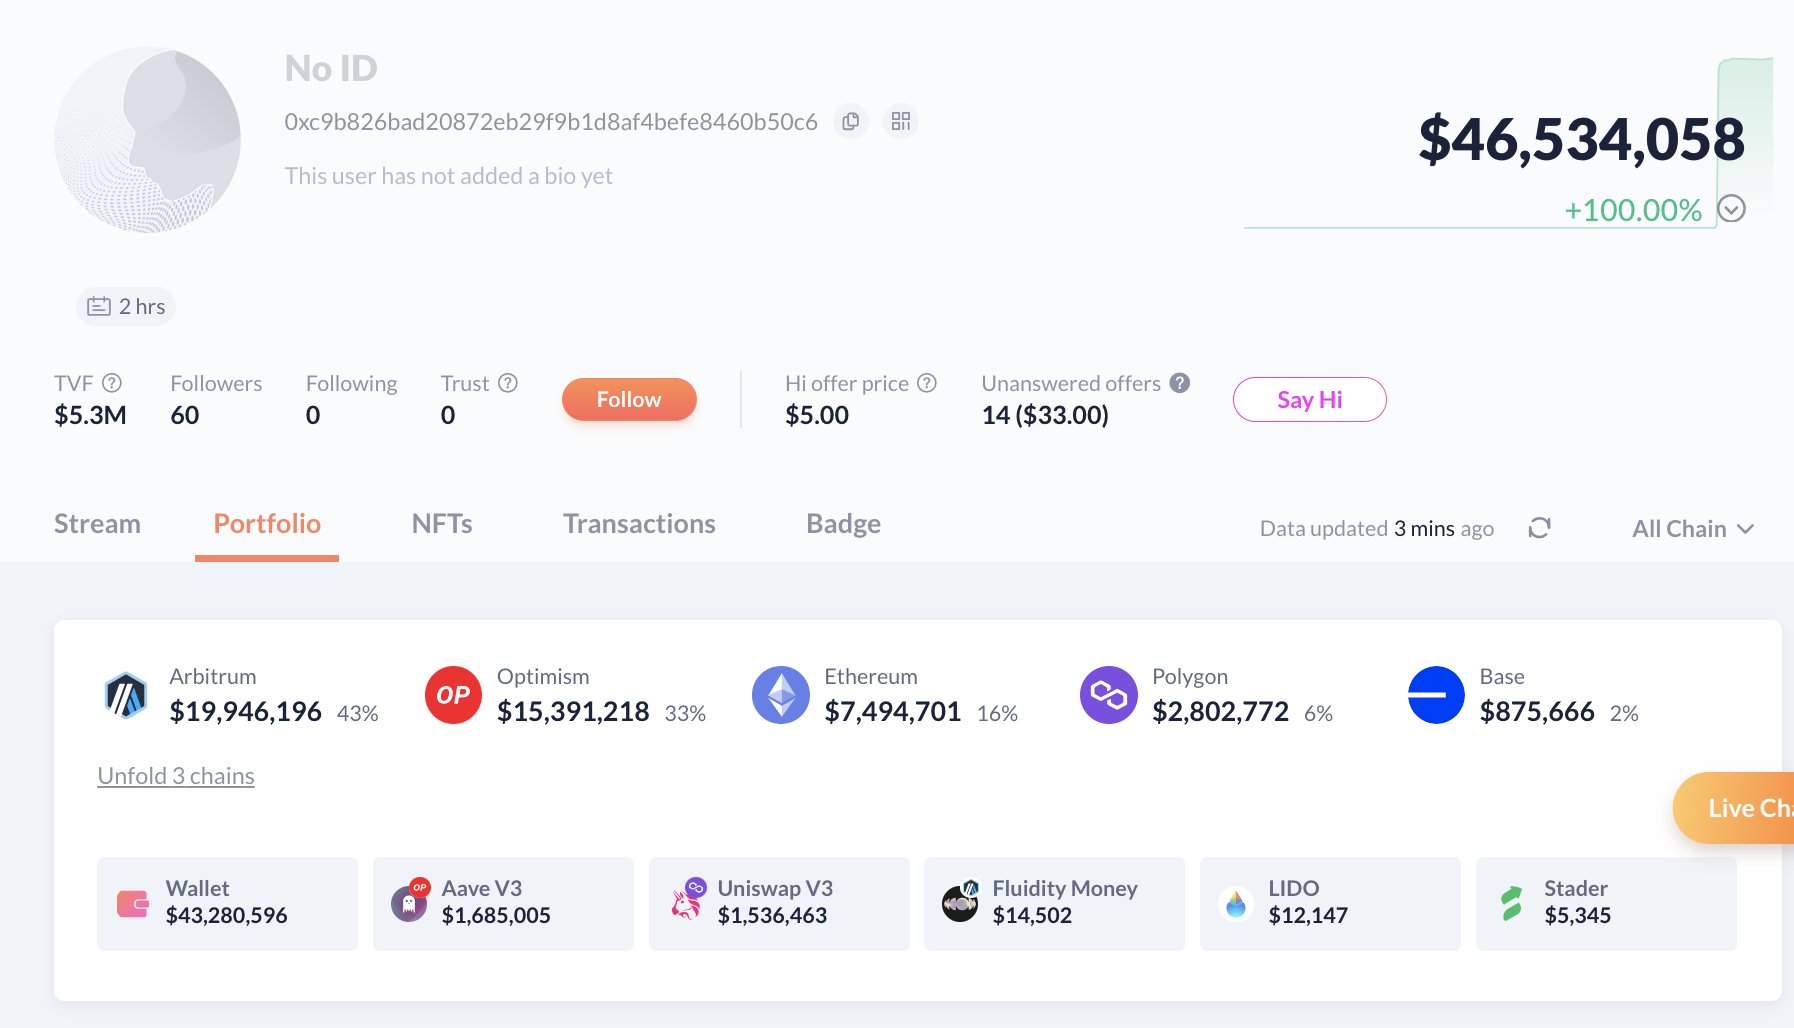 The Kyber Network Drops as the KyberSwap DeFi Platform Drained $46,500,000 in Ethereum, Arbitrum, and Other Assets